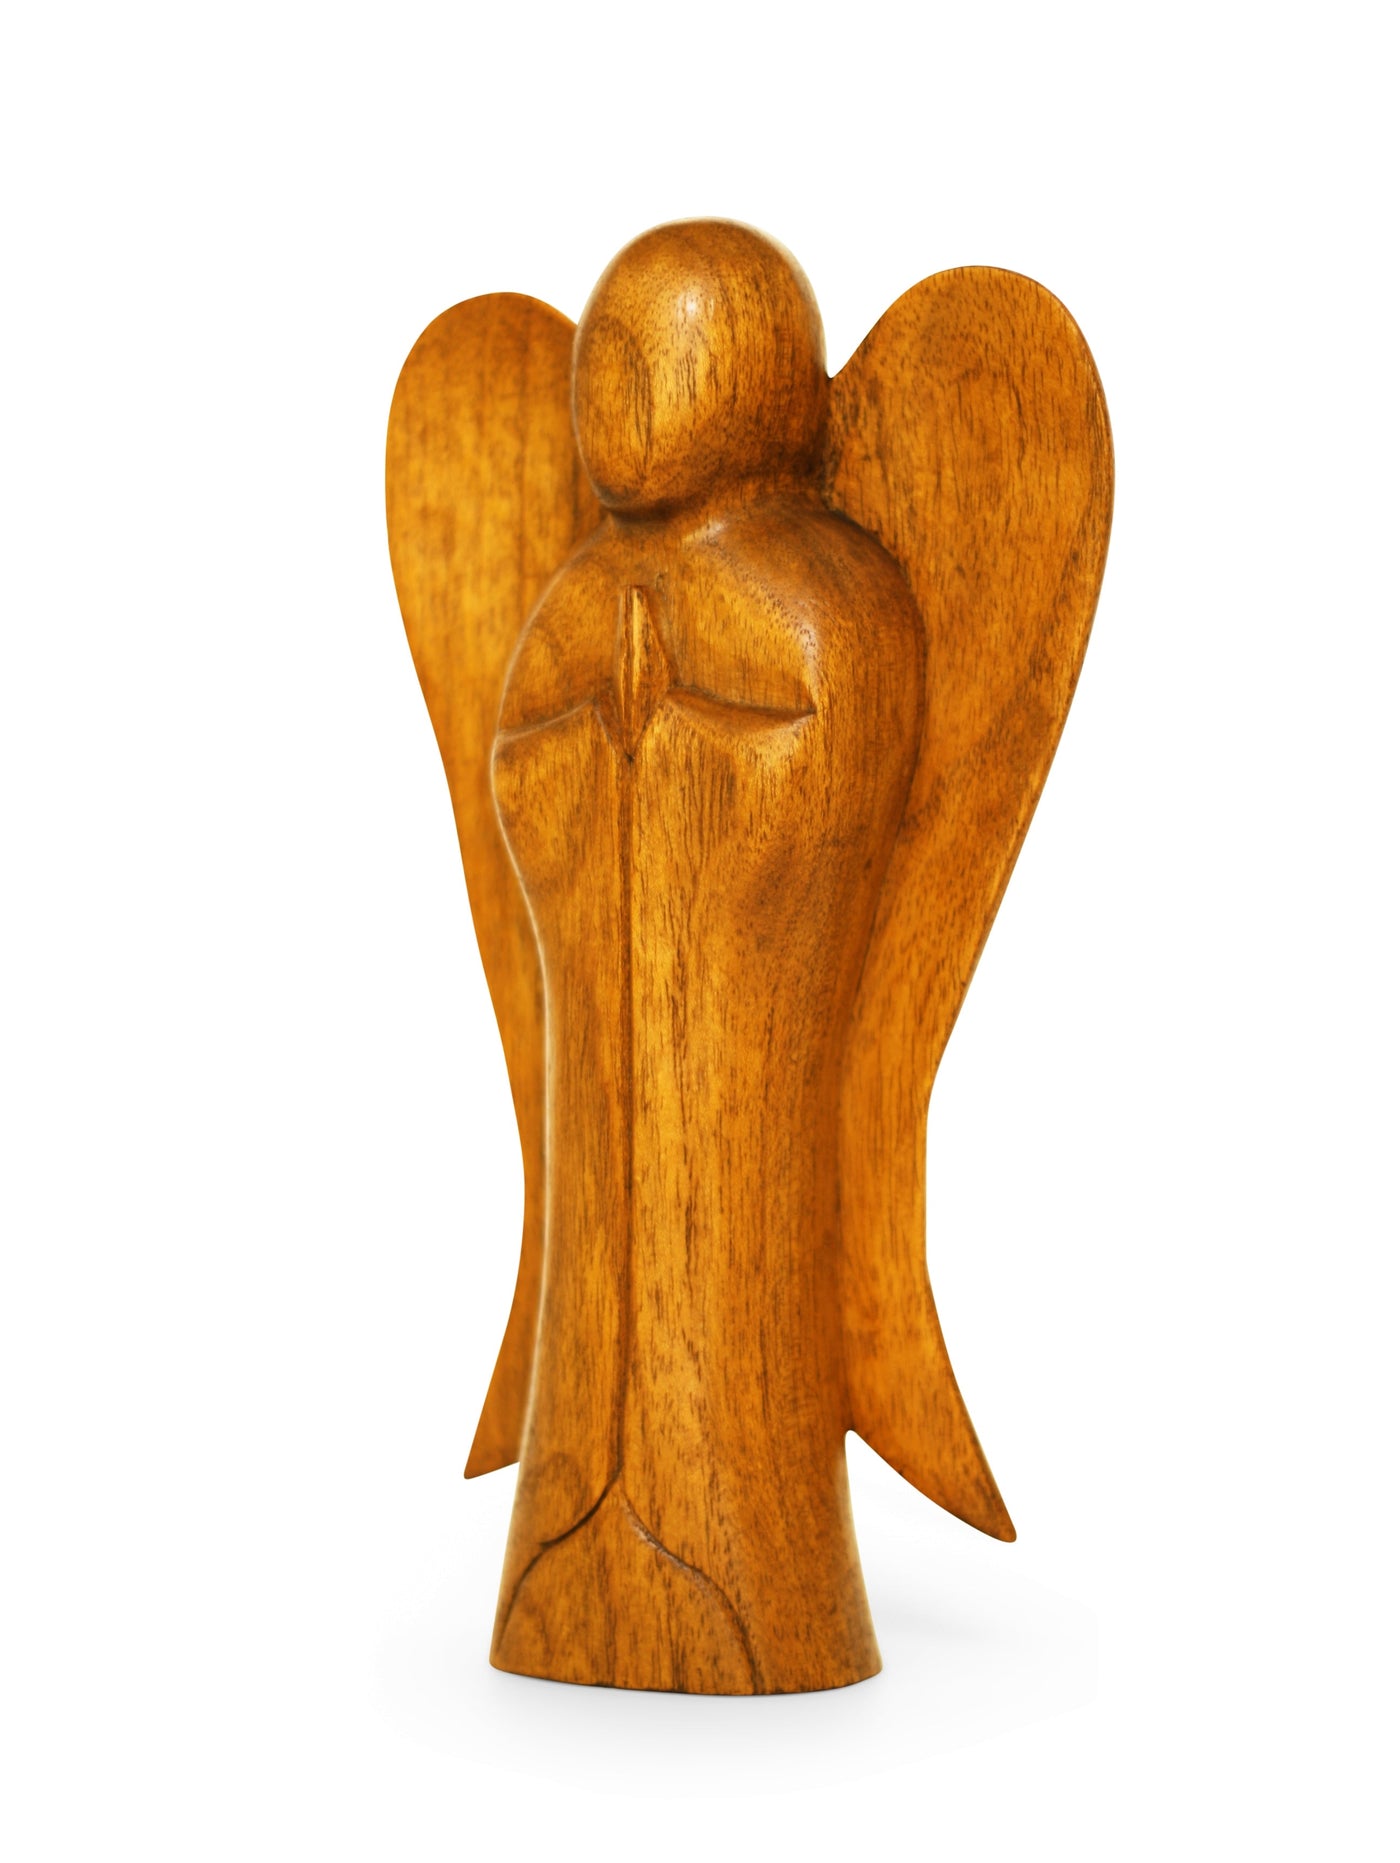 10" Wooden Handmade Abstract Sculpture Statue Handcrafted "Praying Angel" Gift Decorative Home Decor Figurine Accent Decoration Artwork Hand Carved